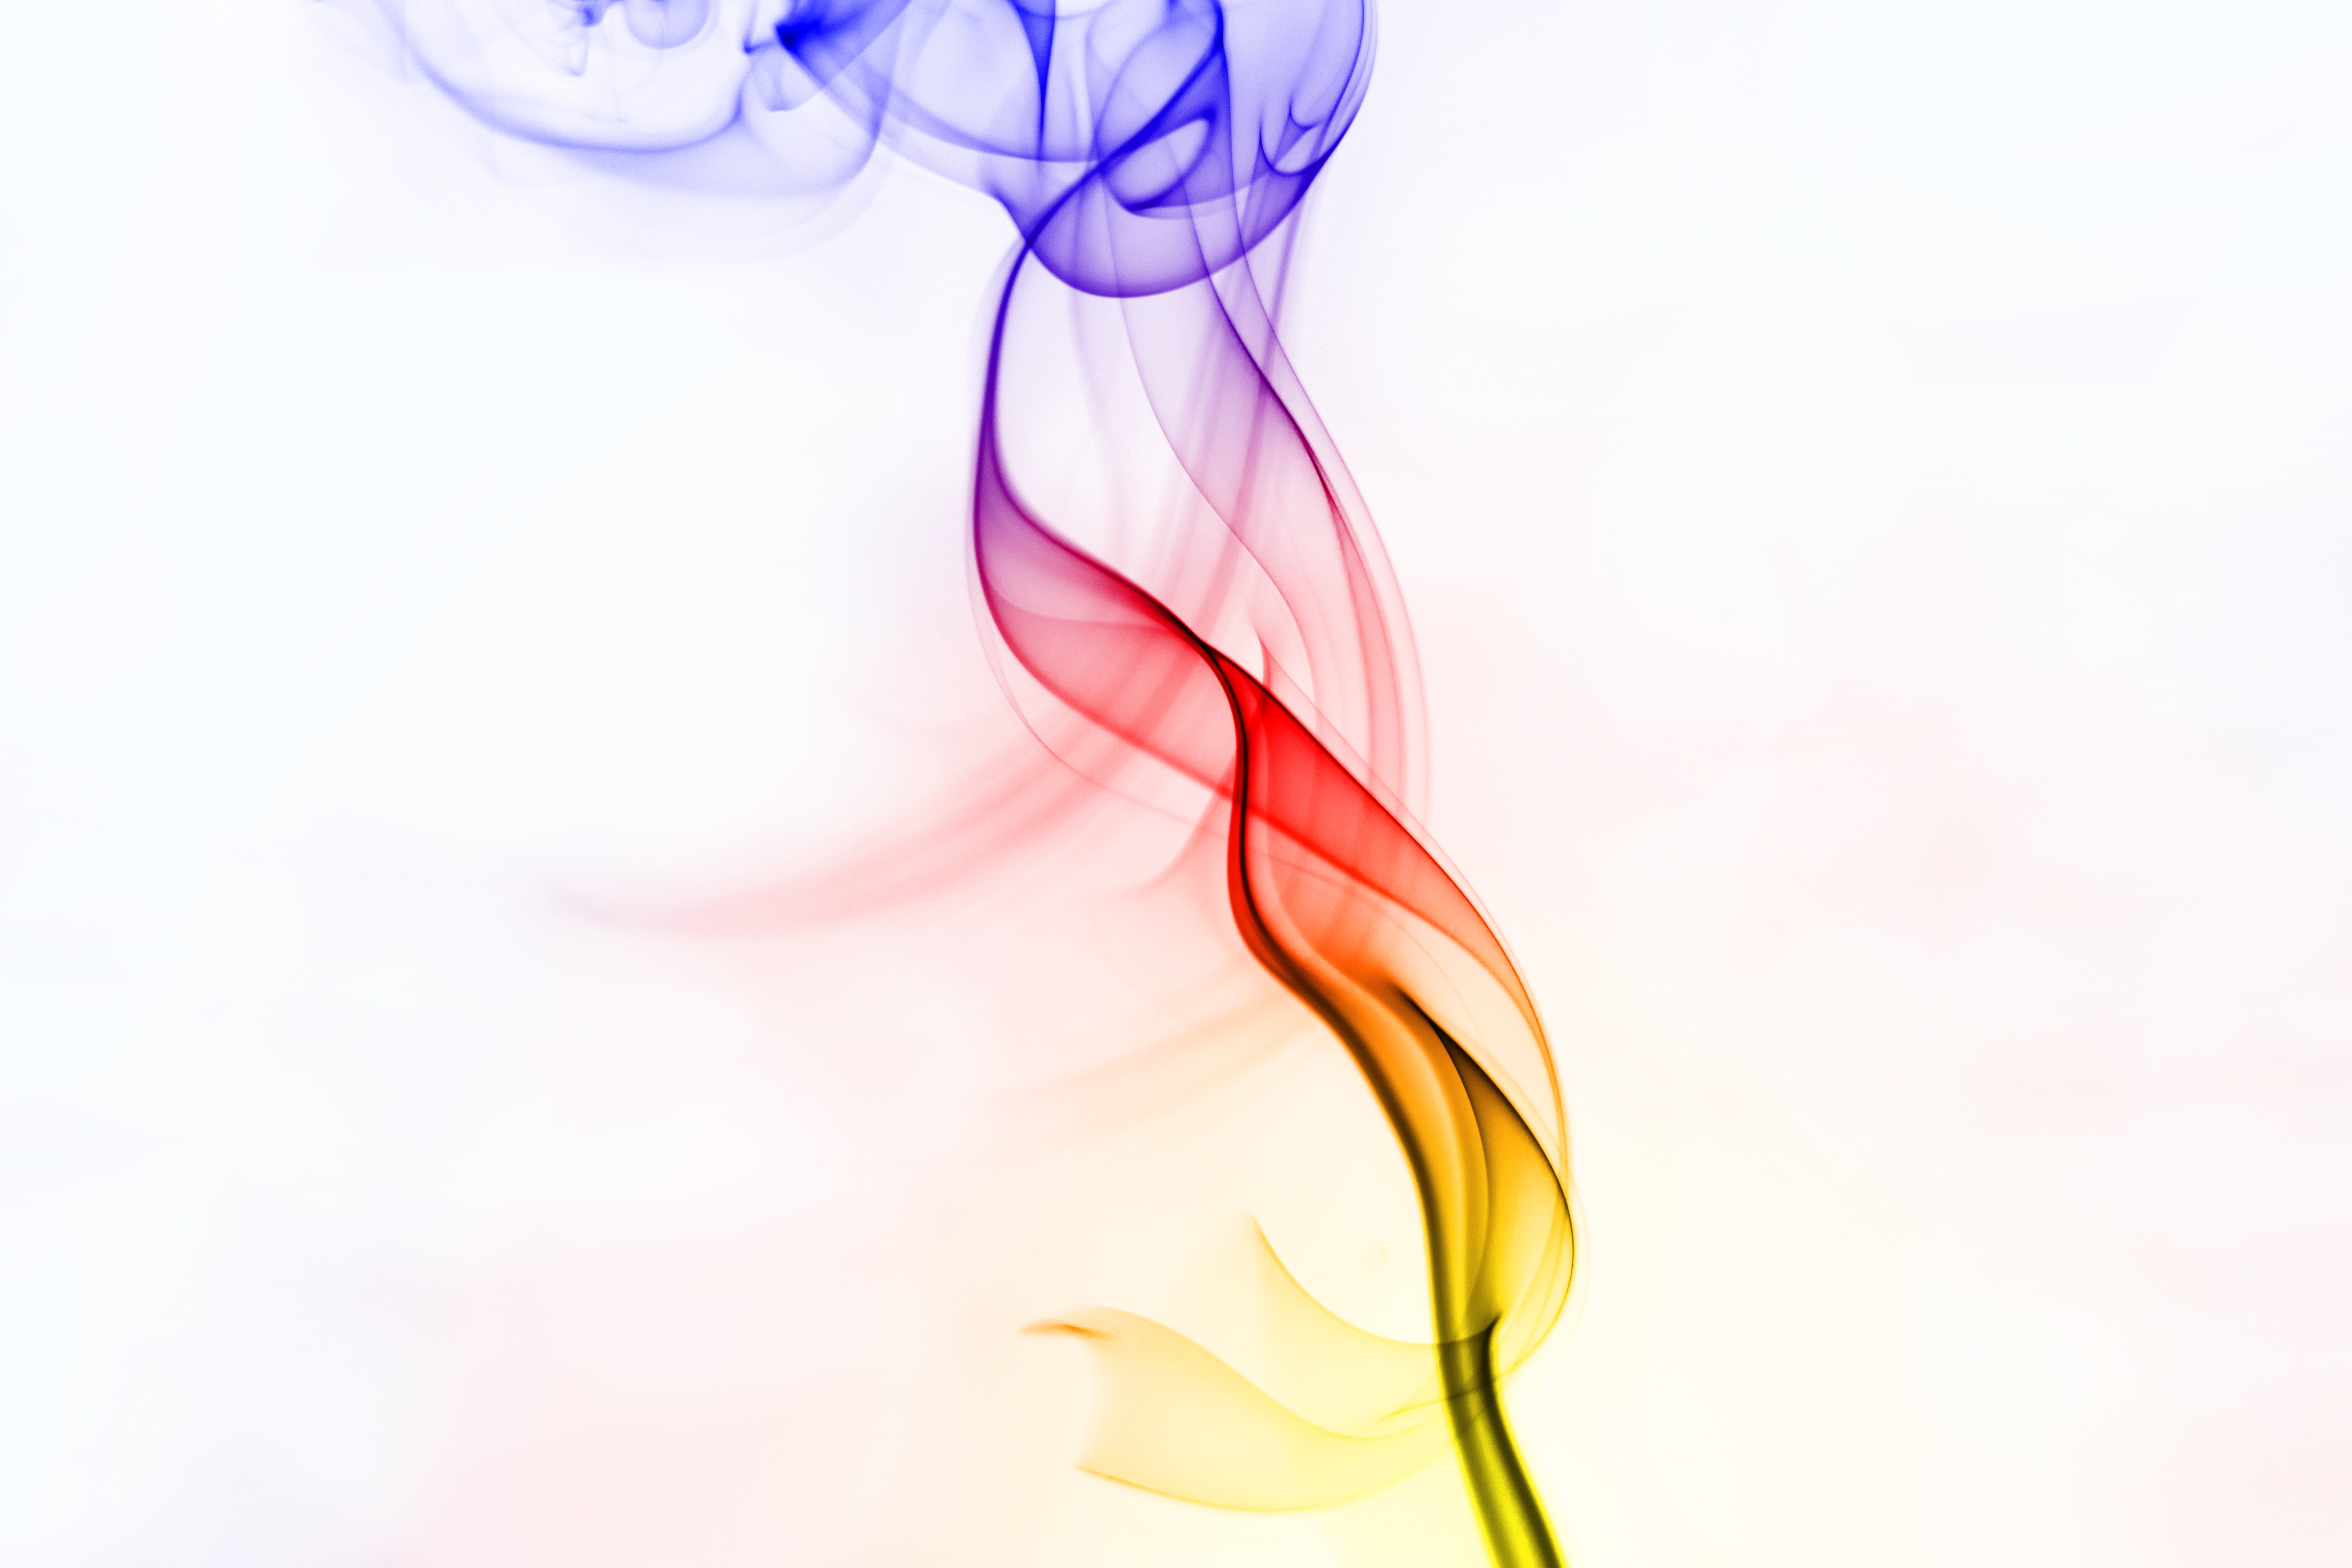 colourful, abstract, shroud, smoke, light, bright, light coloured, colorful High Definition image